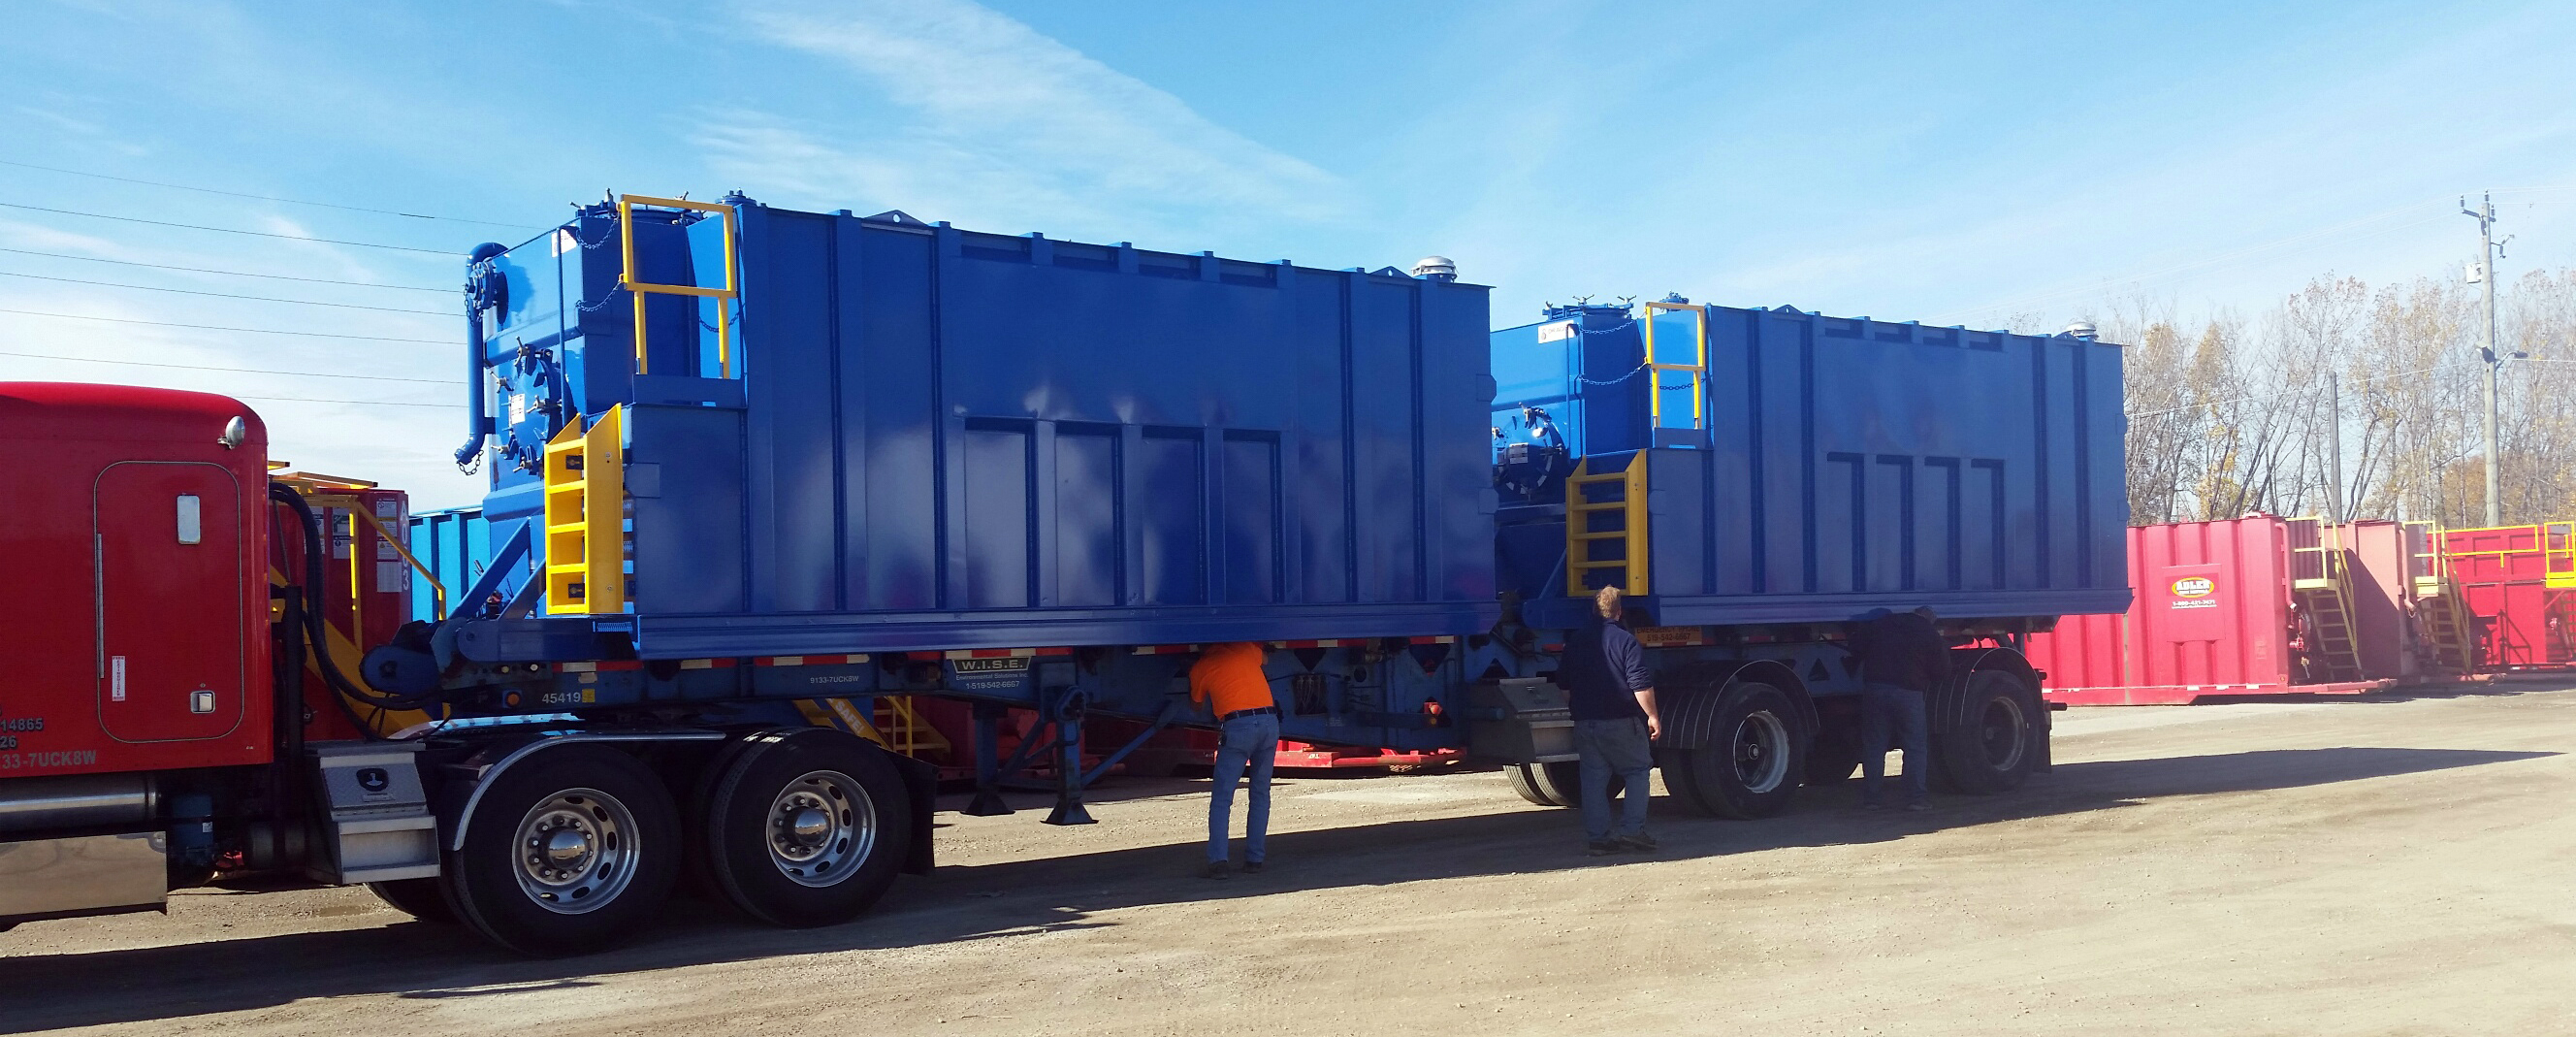 Two Mini Frac tanks loaded on a two-container trailer all manufactured by Dragon. Dragon Products, LTD  will debut their Mini Frac tanks during the annual Water & Wastewater Equipment, Treatment & Tra